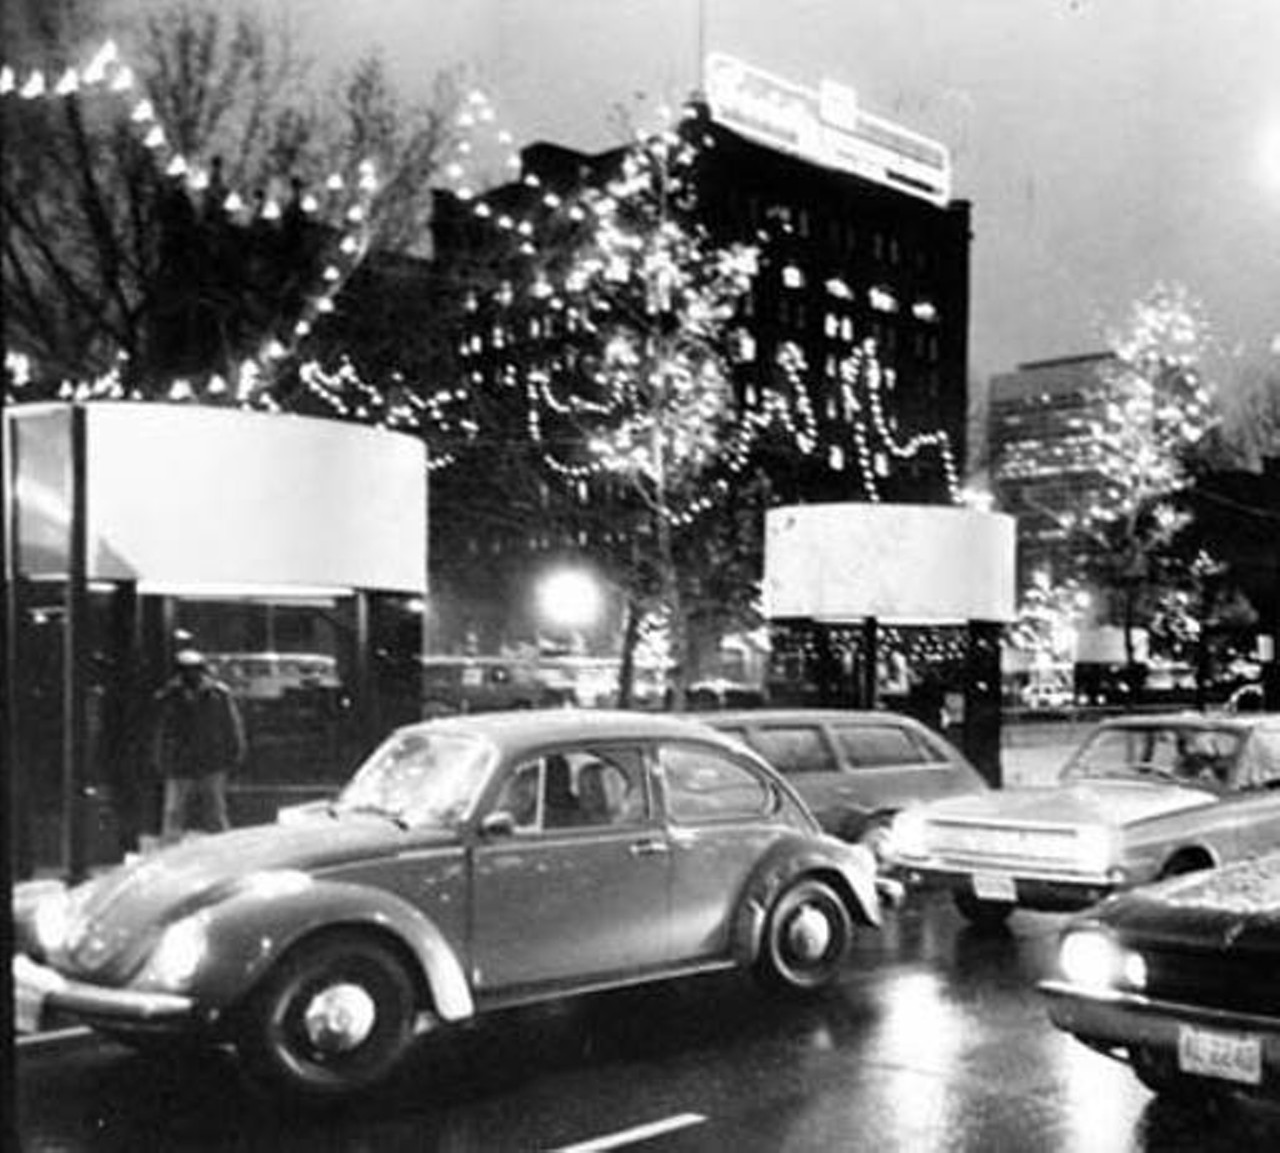 Cheery lights greet drivers in downtown Cleveland, 1980.